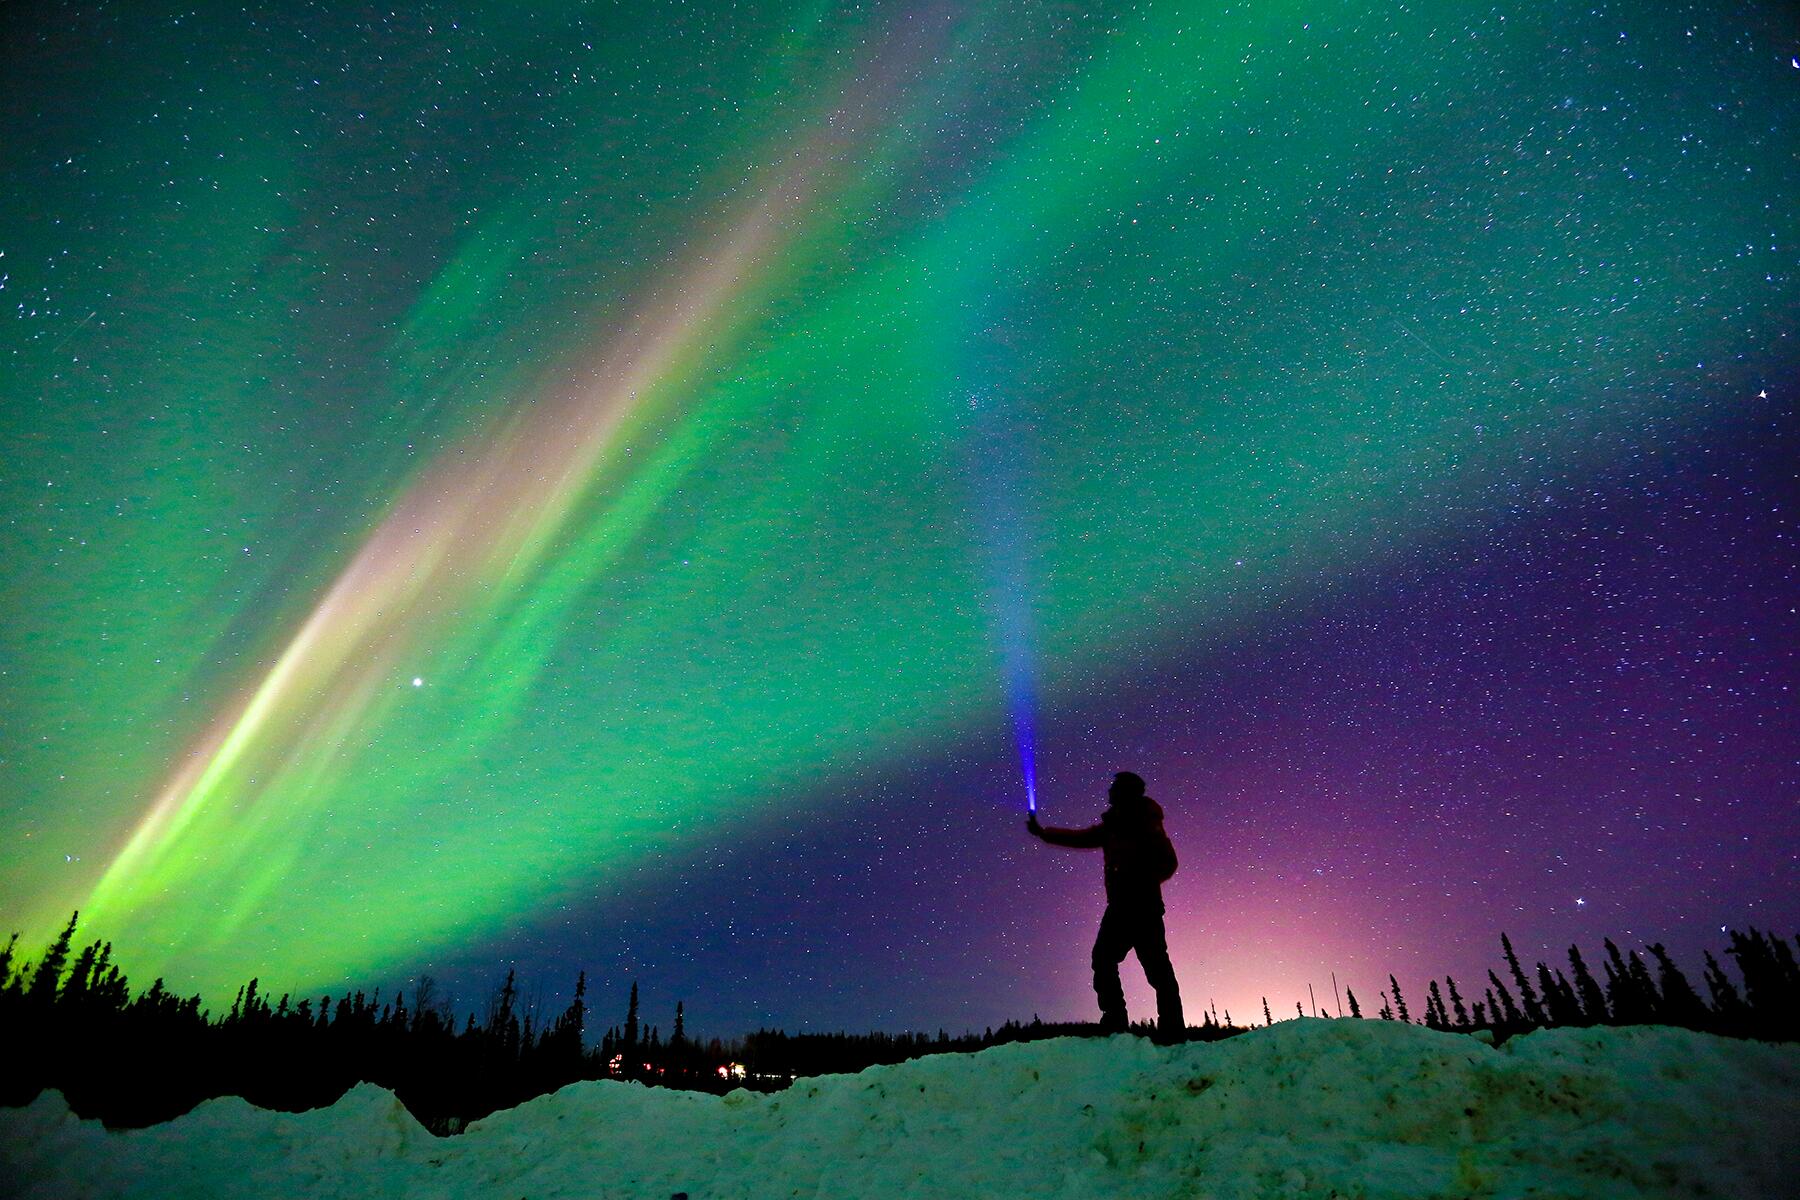 U.S. Best Places to Visit and Visibly See the Northern Lights